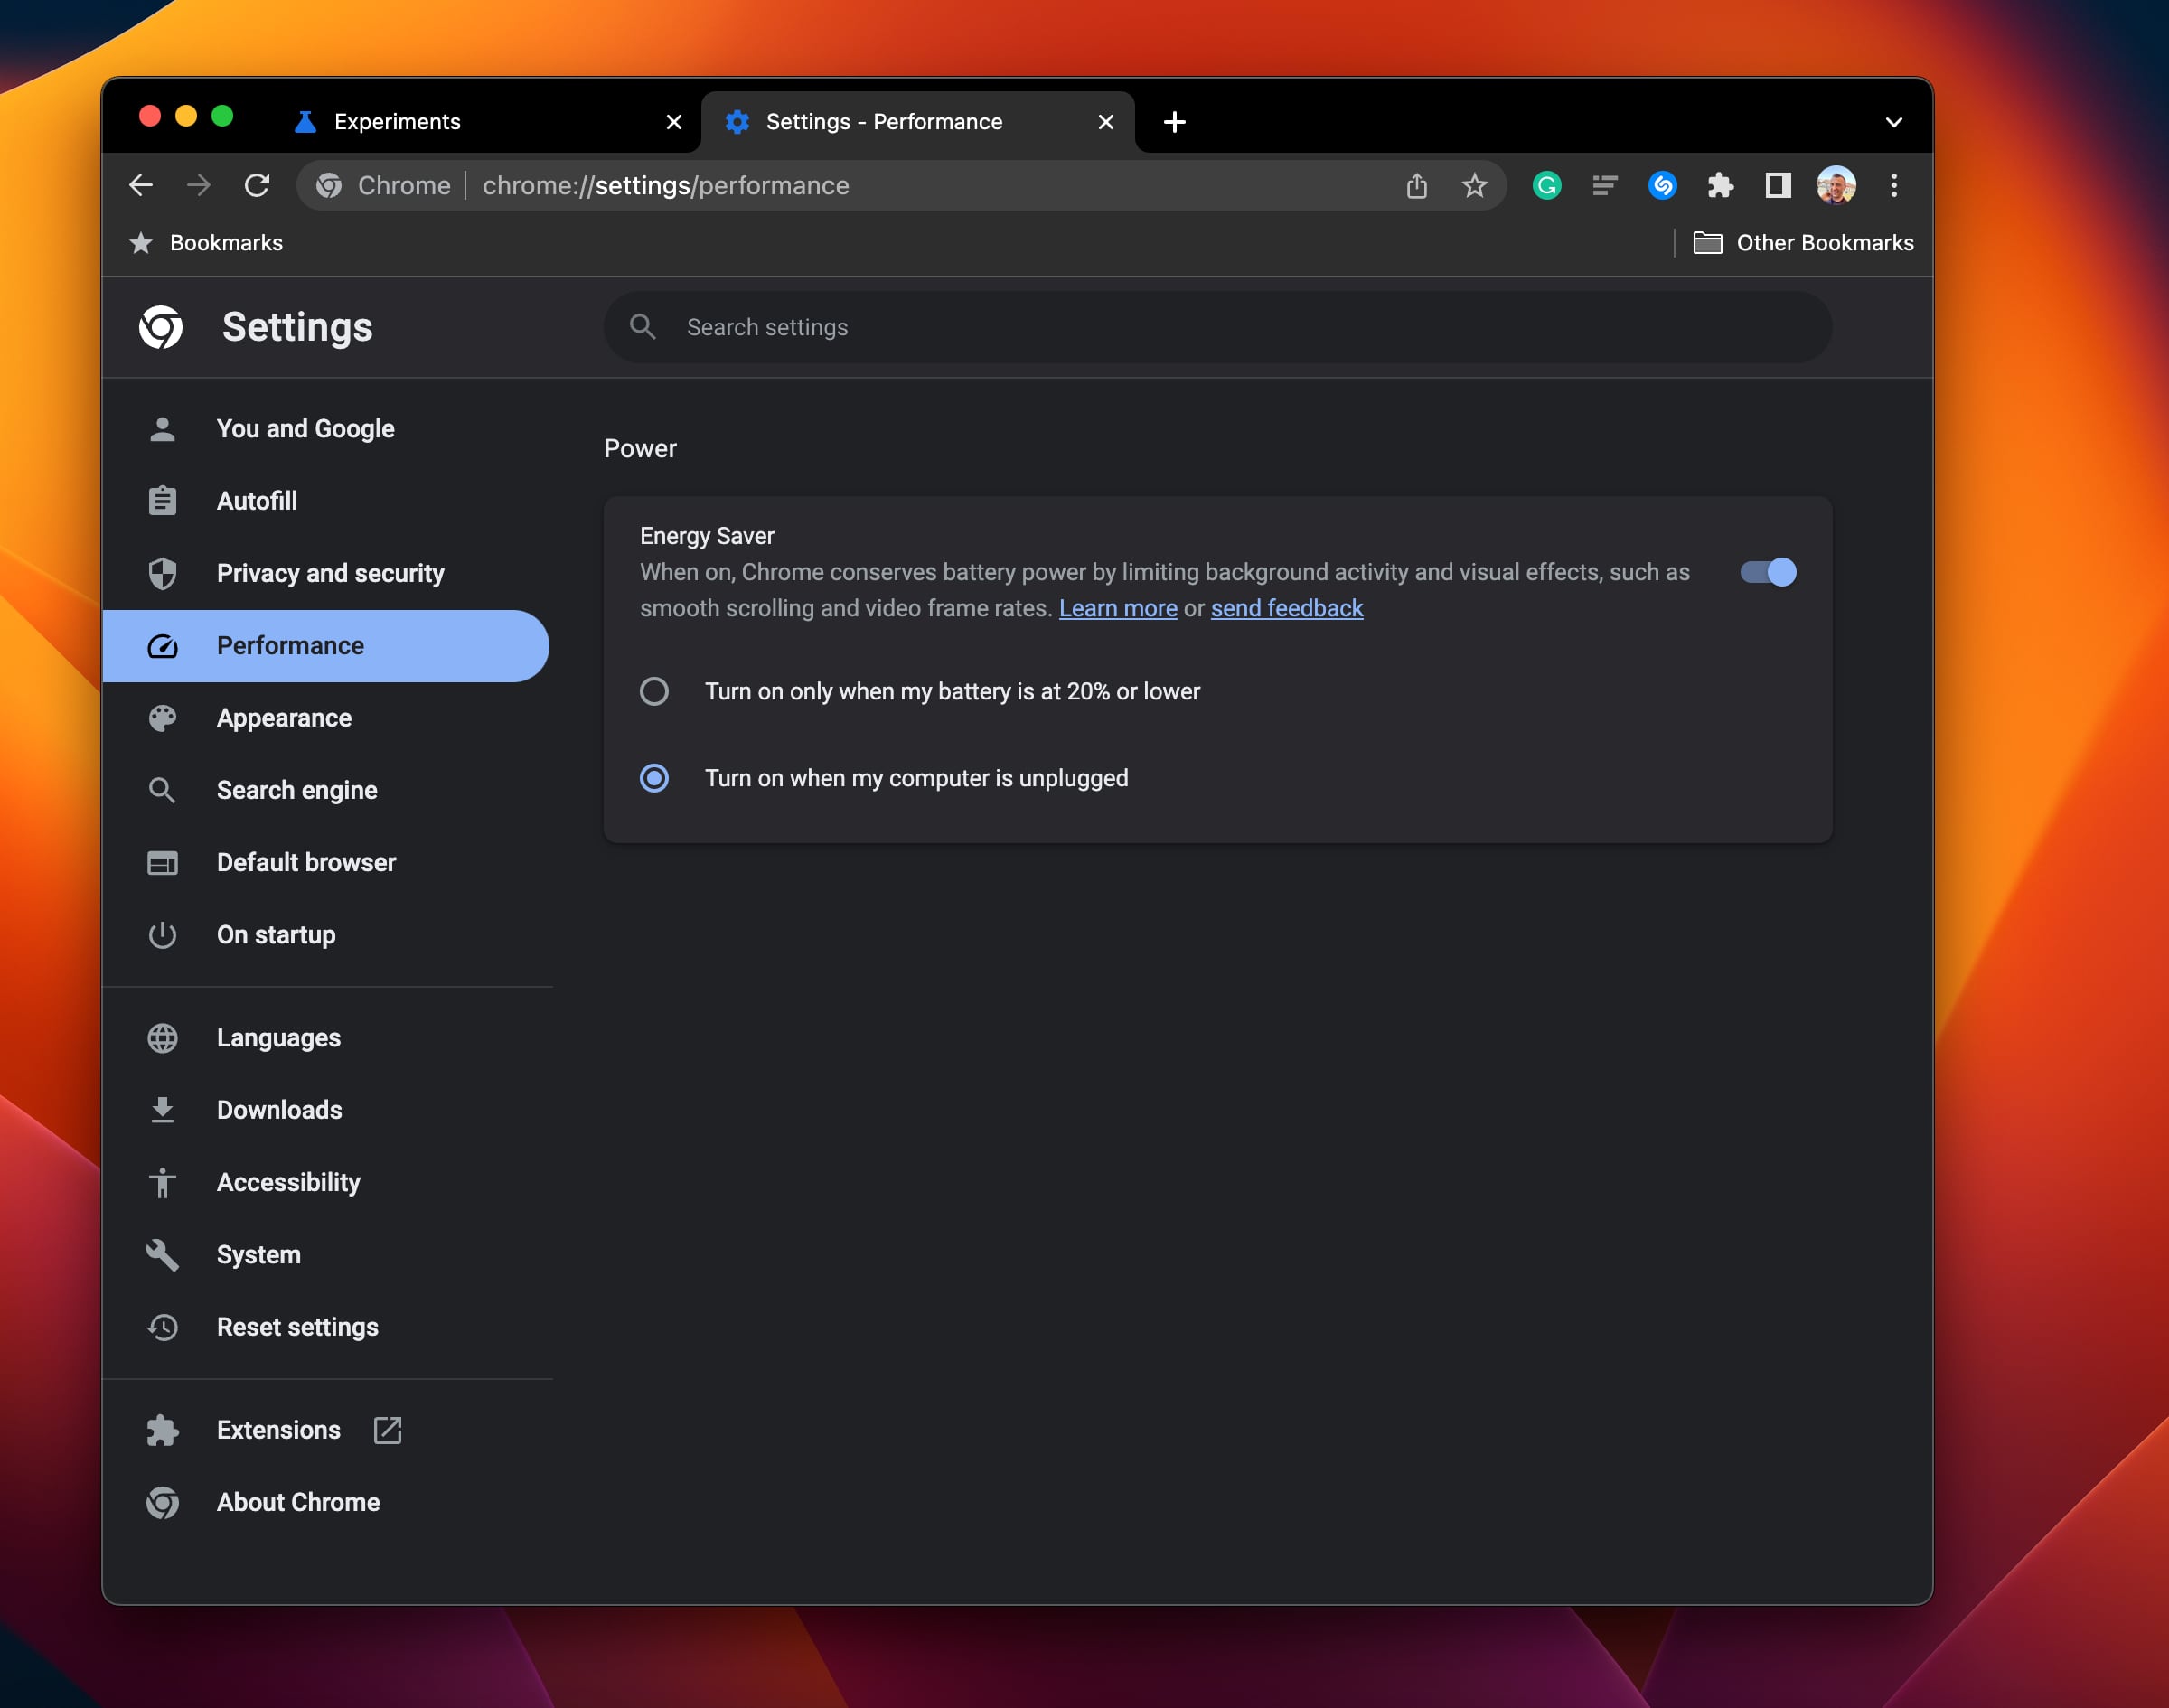 The Performance section of the Google Chrome settings on macOS showcasing two Energy Saver options